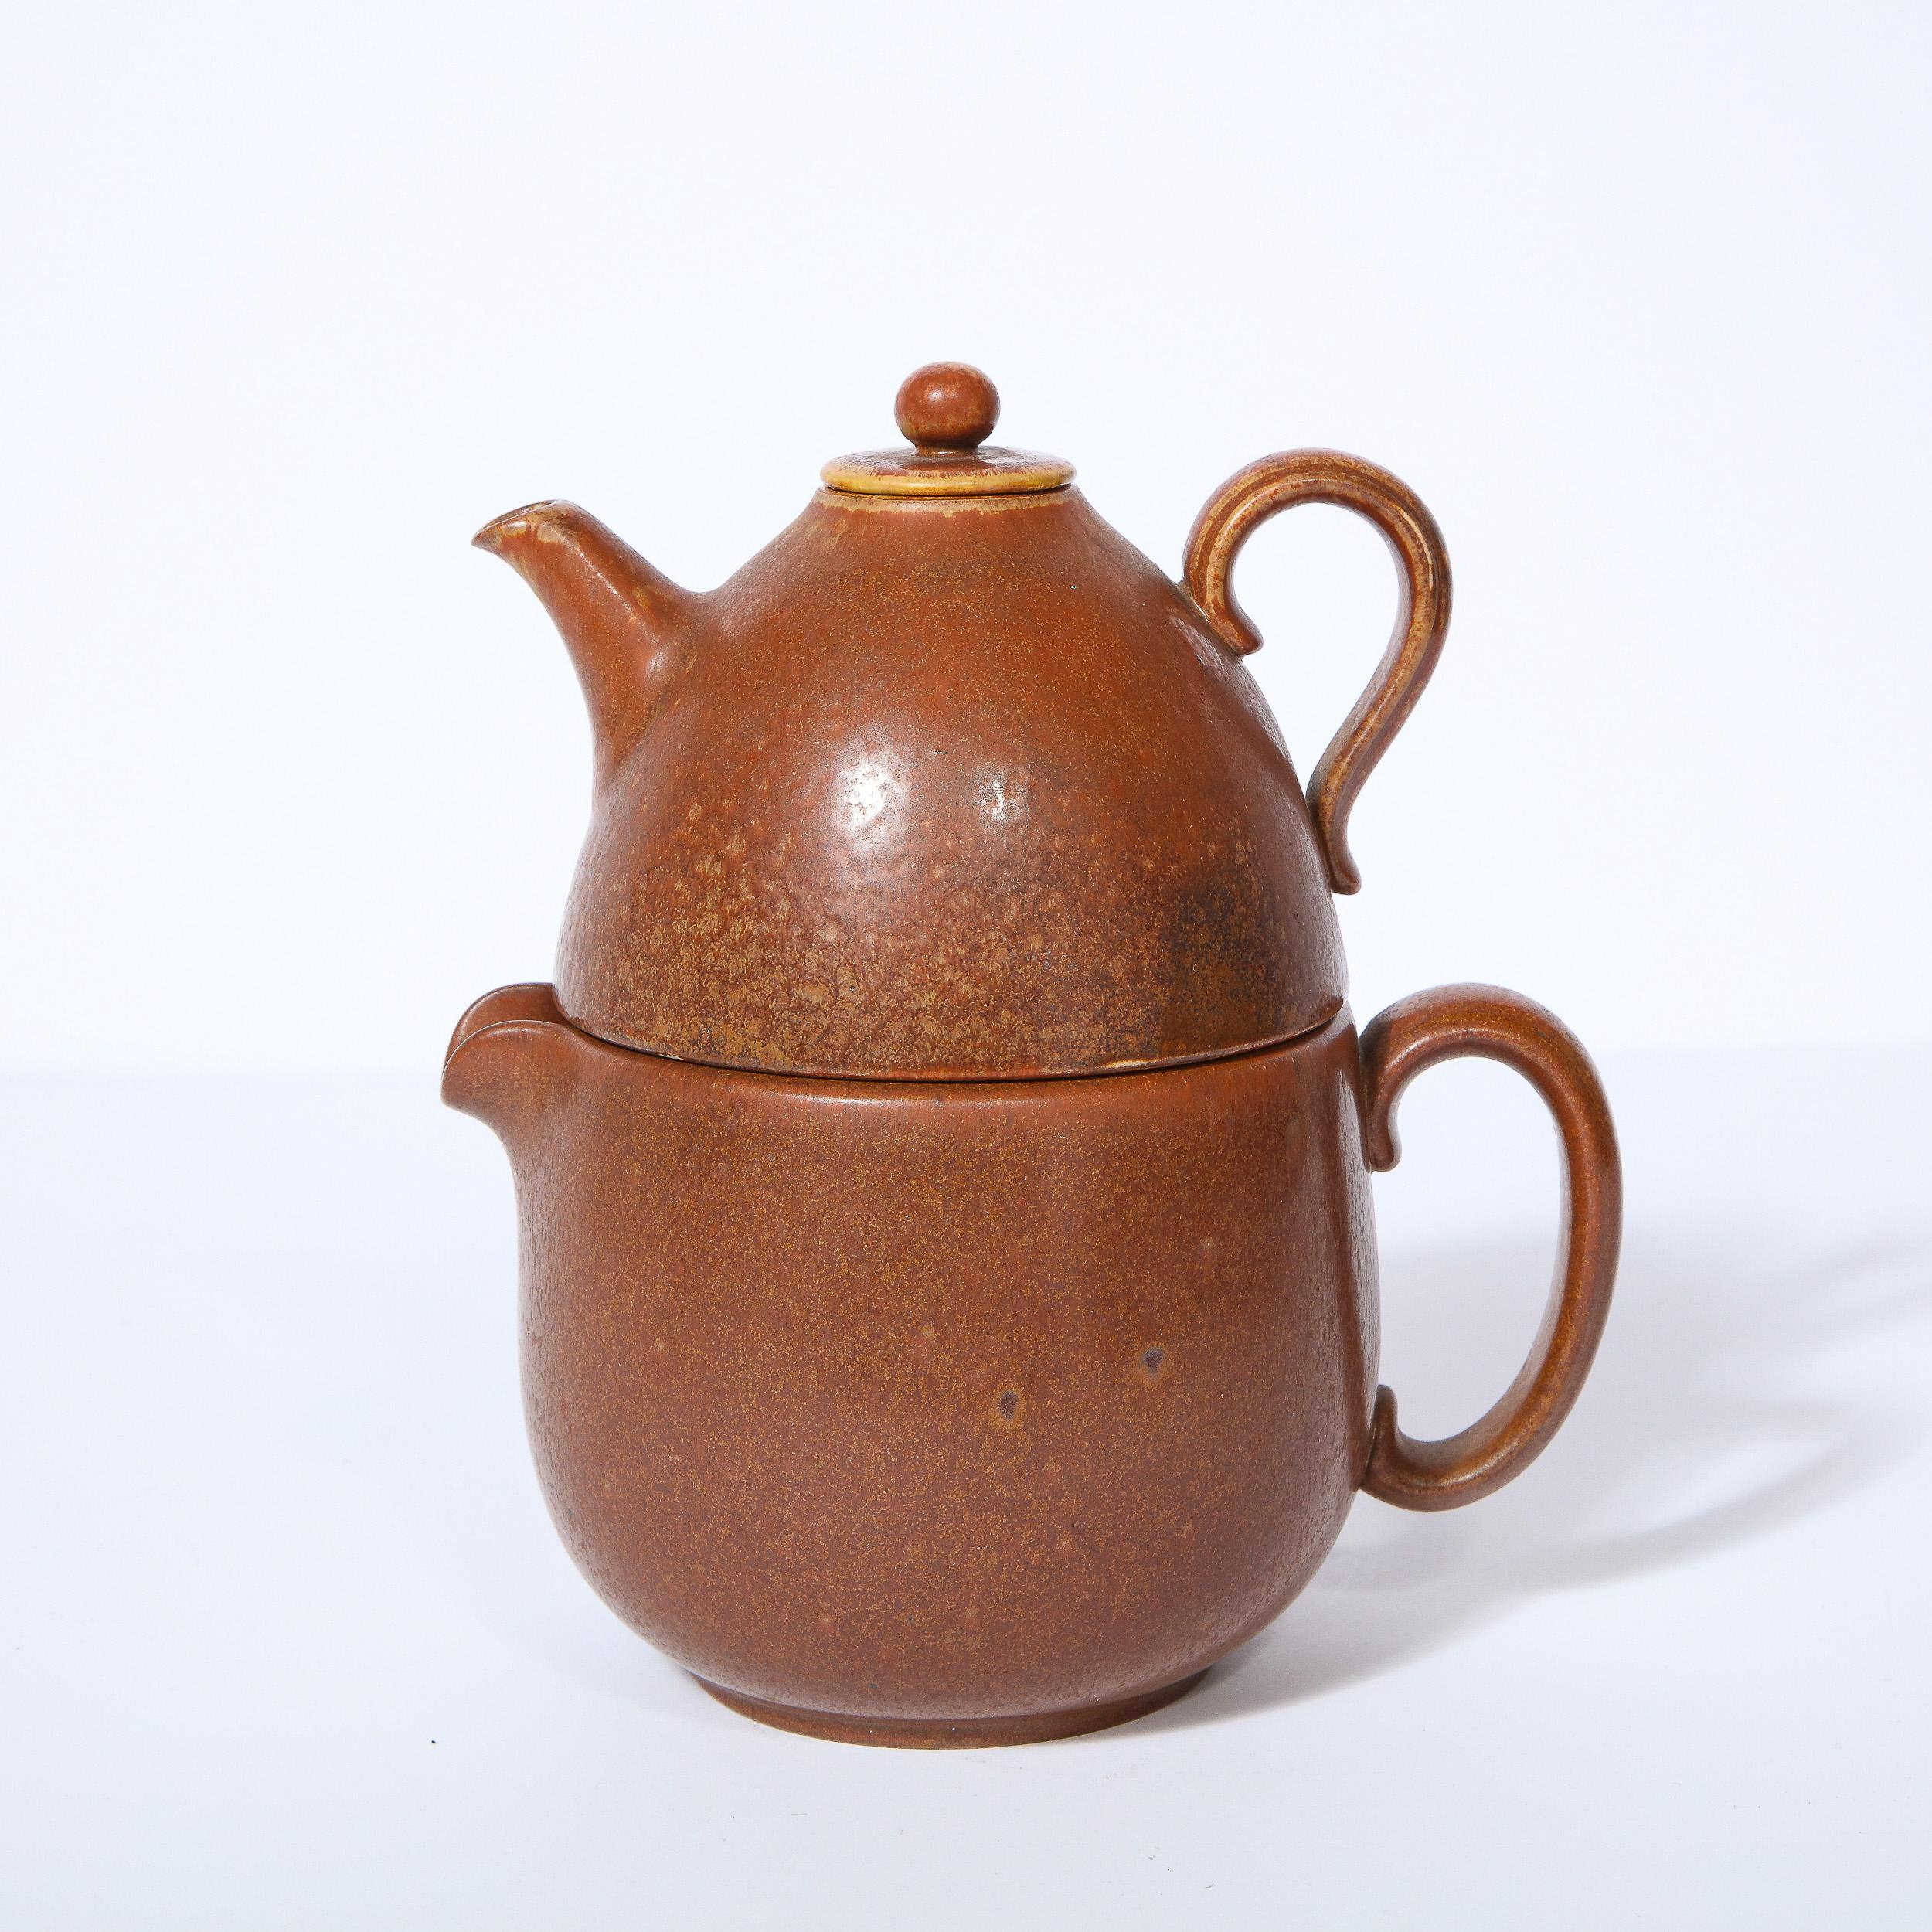 This refined Mid-Century Modern Scandinavian double teapot was realized by the esteemed Gunnar Nylund for Rorstrand in Sweden circa 1960. It features an ceramic stoneware teapot with a spout and curved handle onto which another domed teapot with a